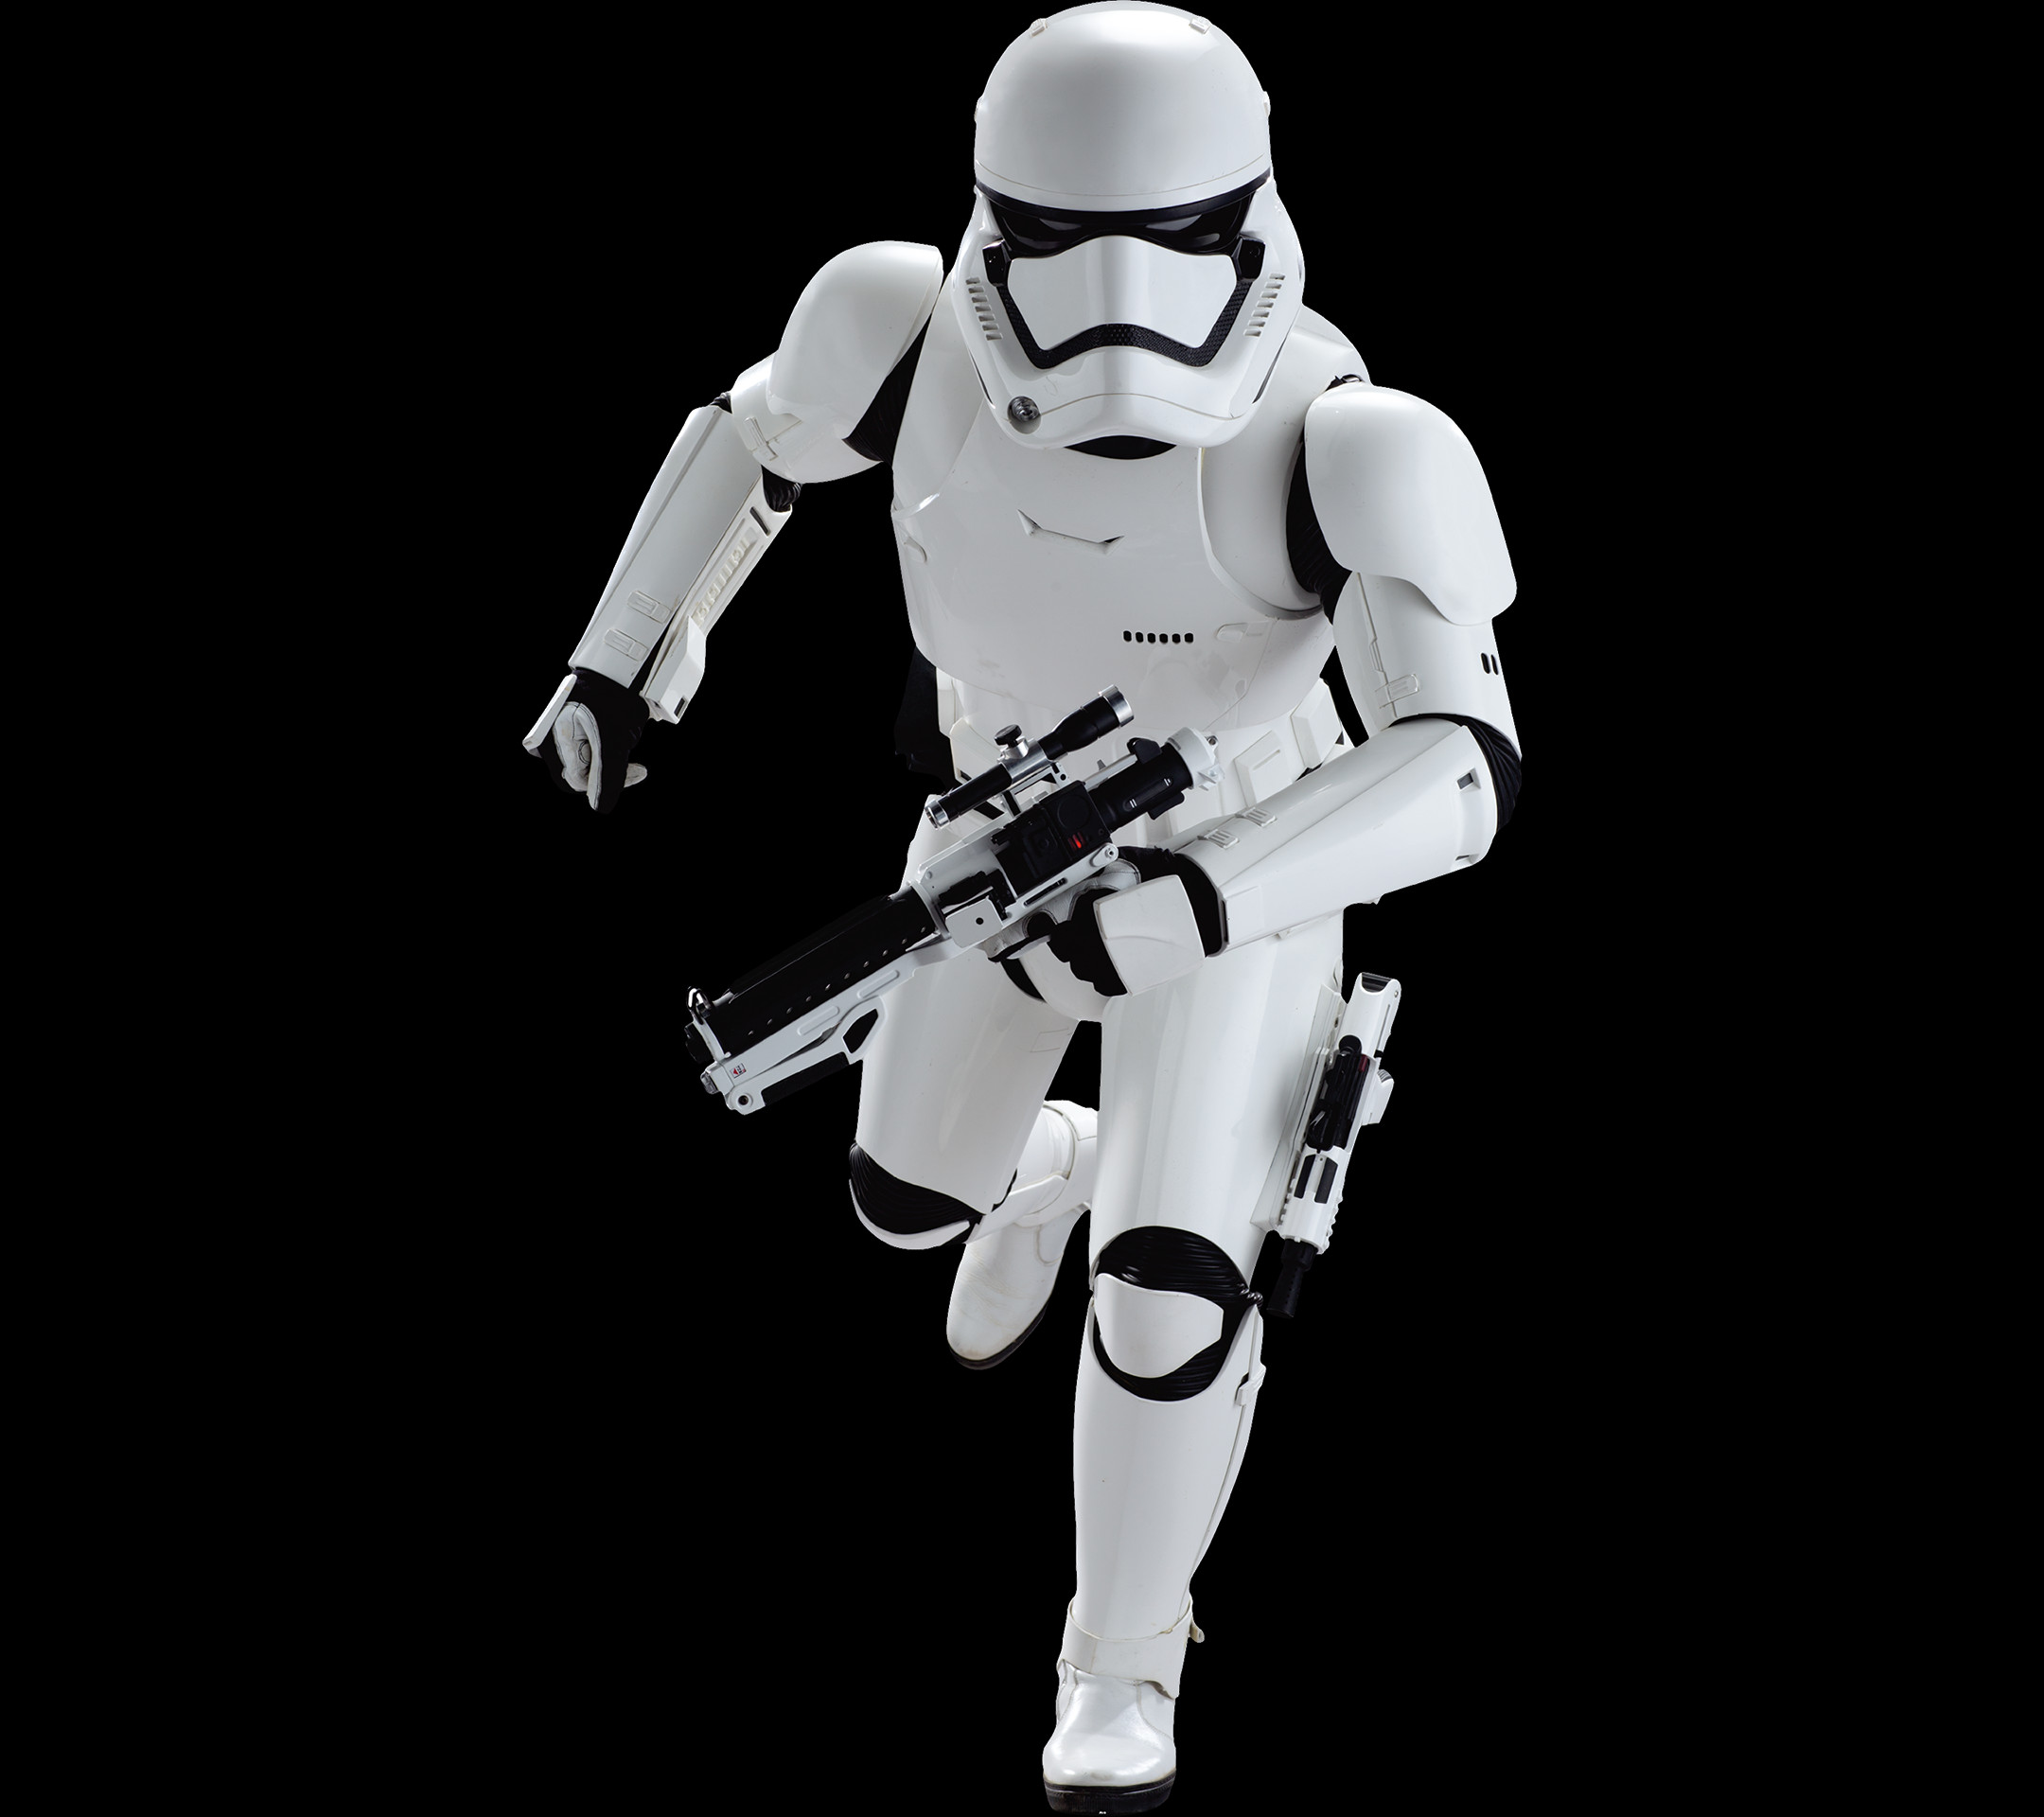 2160x1920 ... Stormtrooper running in Star Wars: Episode VII - The Force A Movie  mobile wallpaper